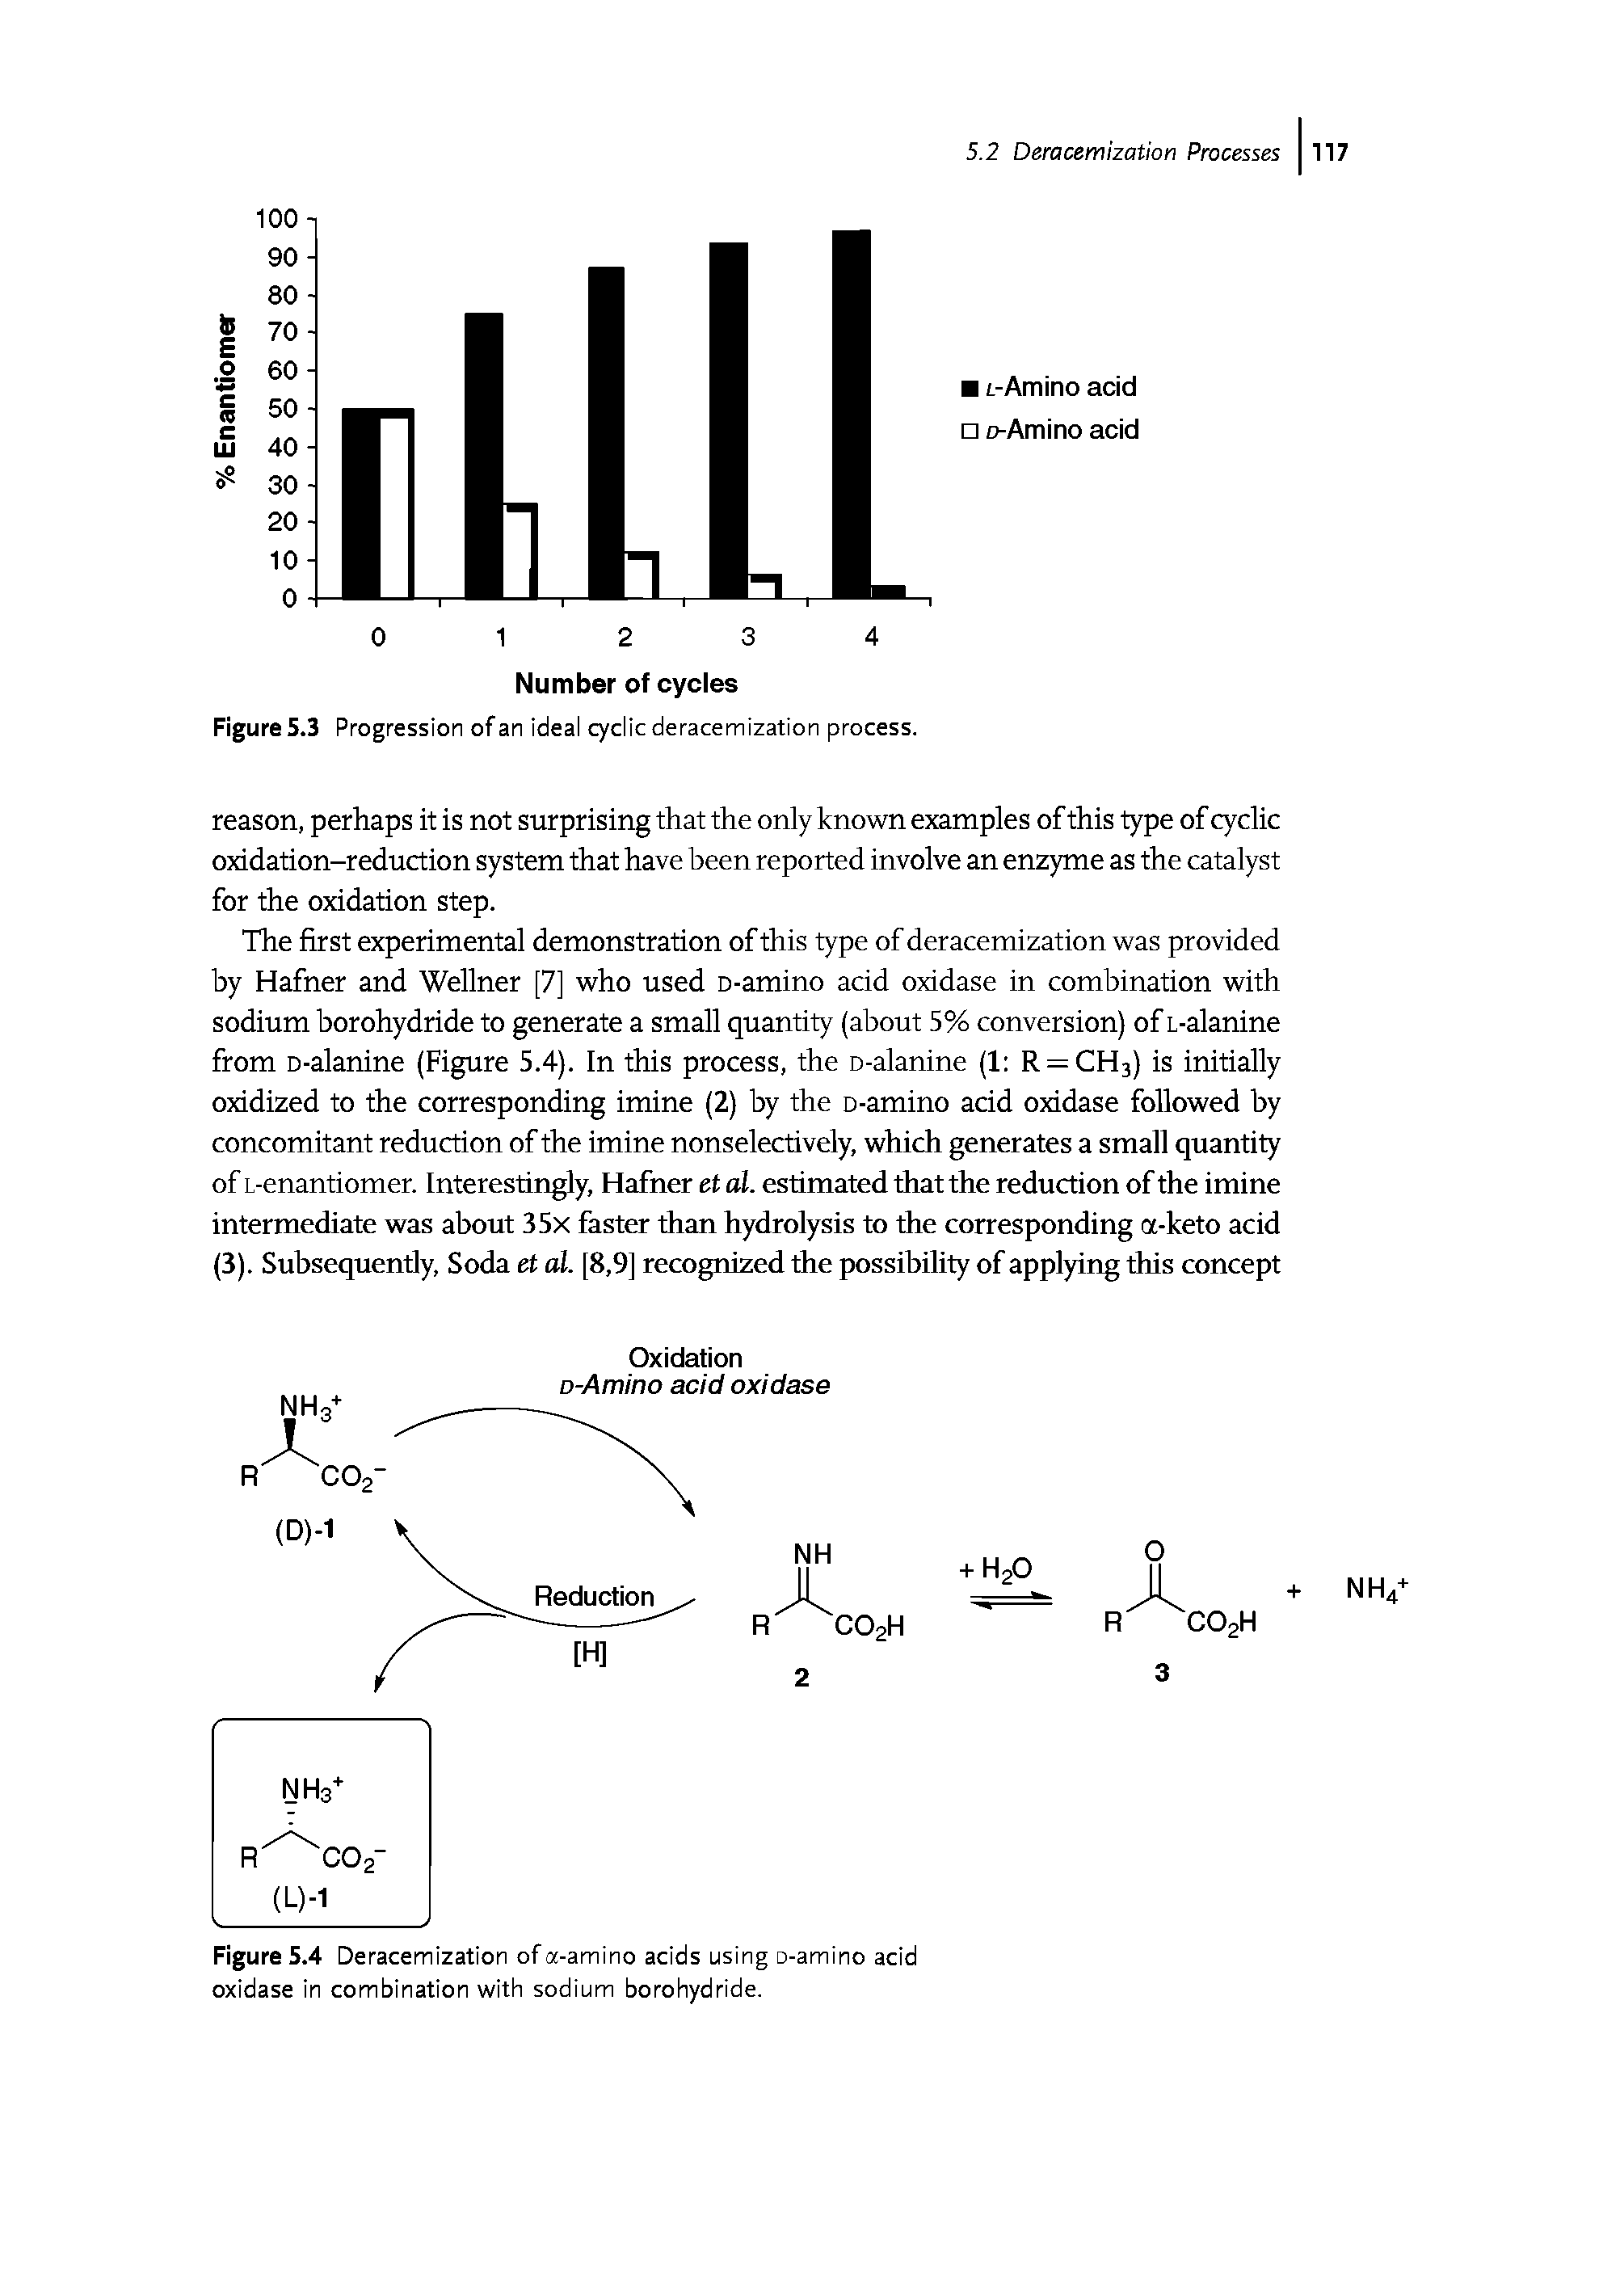 Figure 5.4 Deracemization of a-amino acids using D-amino acid oxidase in combination with sodium borohydride.